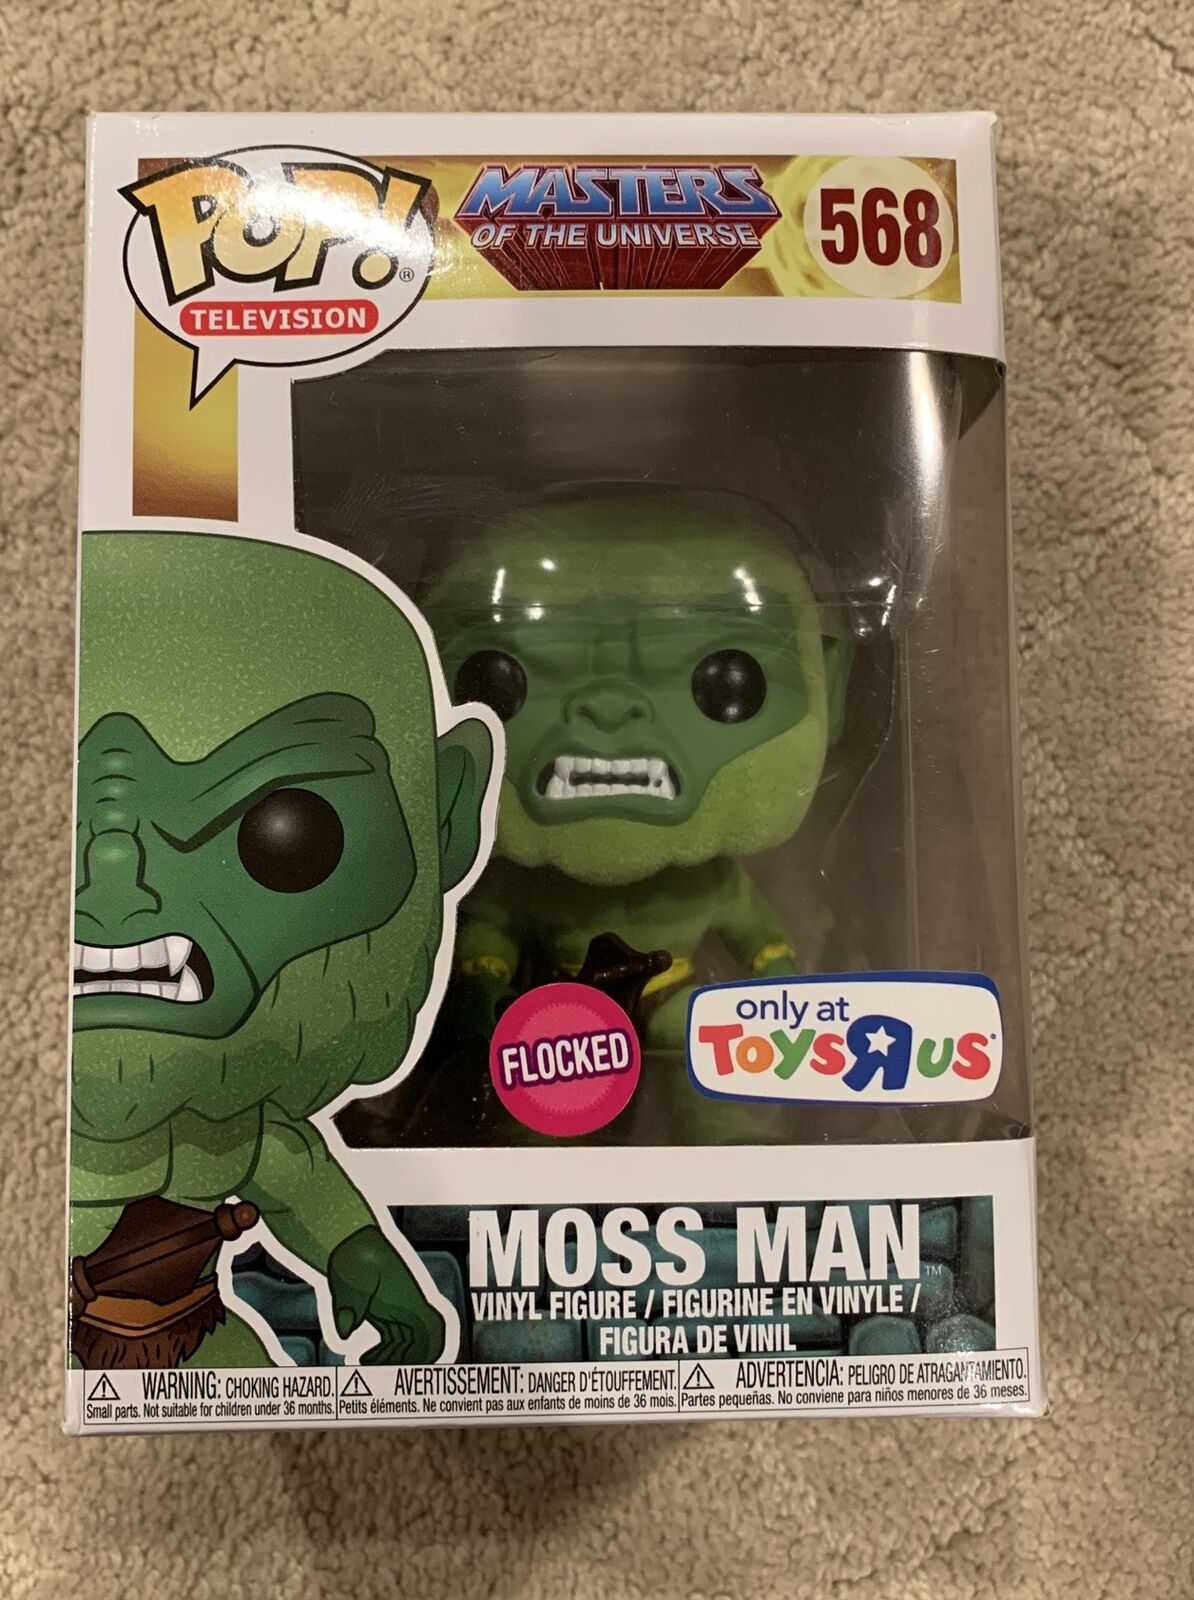 Moss Man Flocked Funko Pop VN Figure-Masters of Universe Toys R Us Exclusive 568